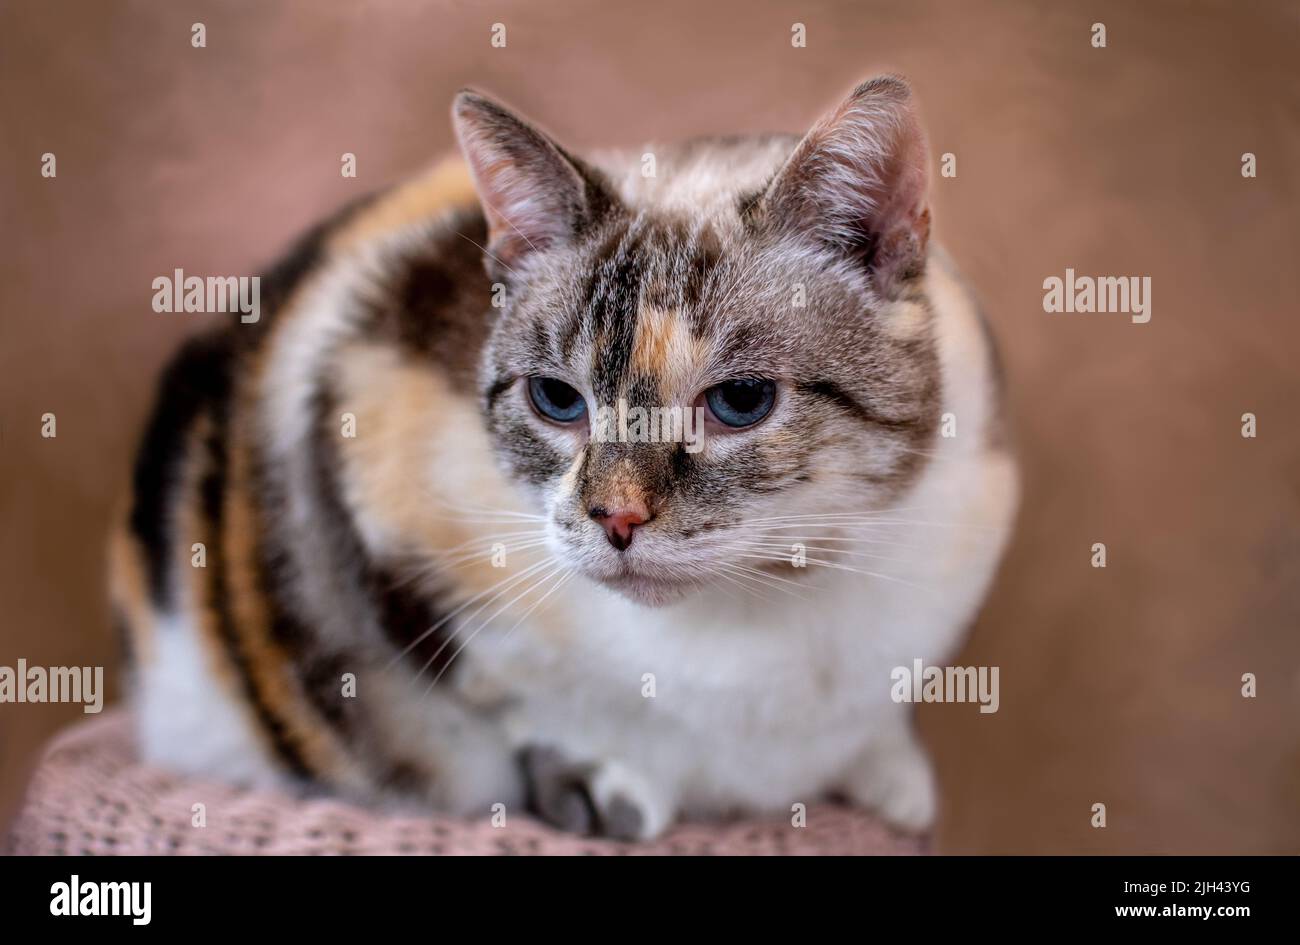 Pretty calico cat sits on a stool and poses for a portrait Stock Photo